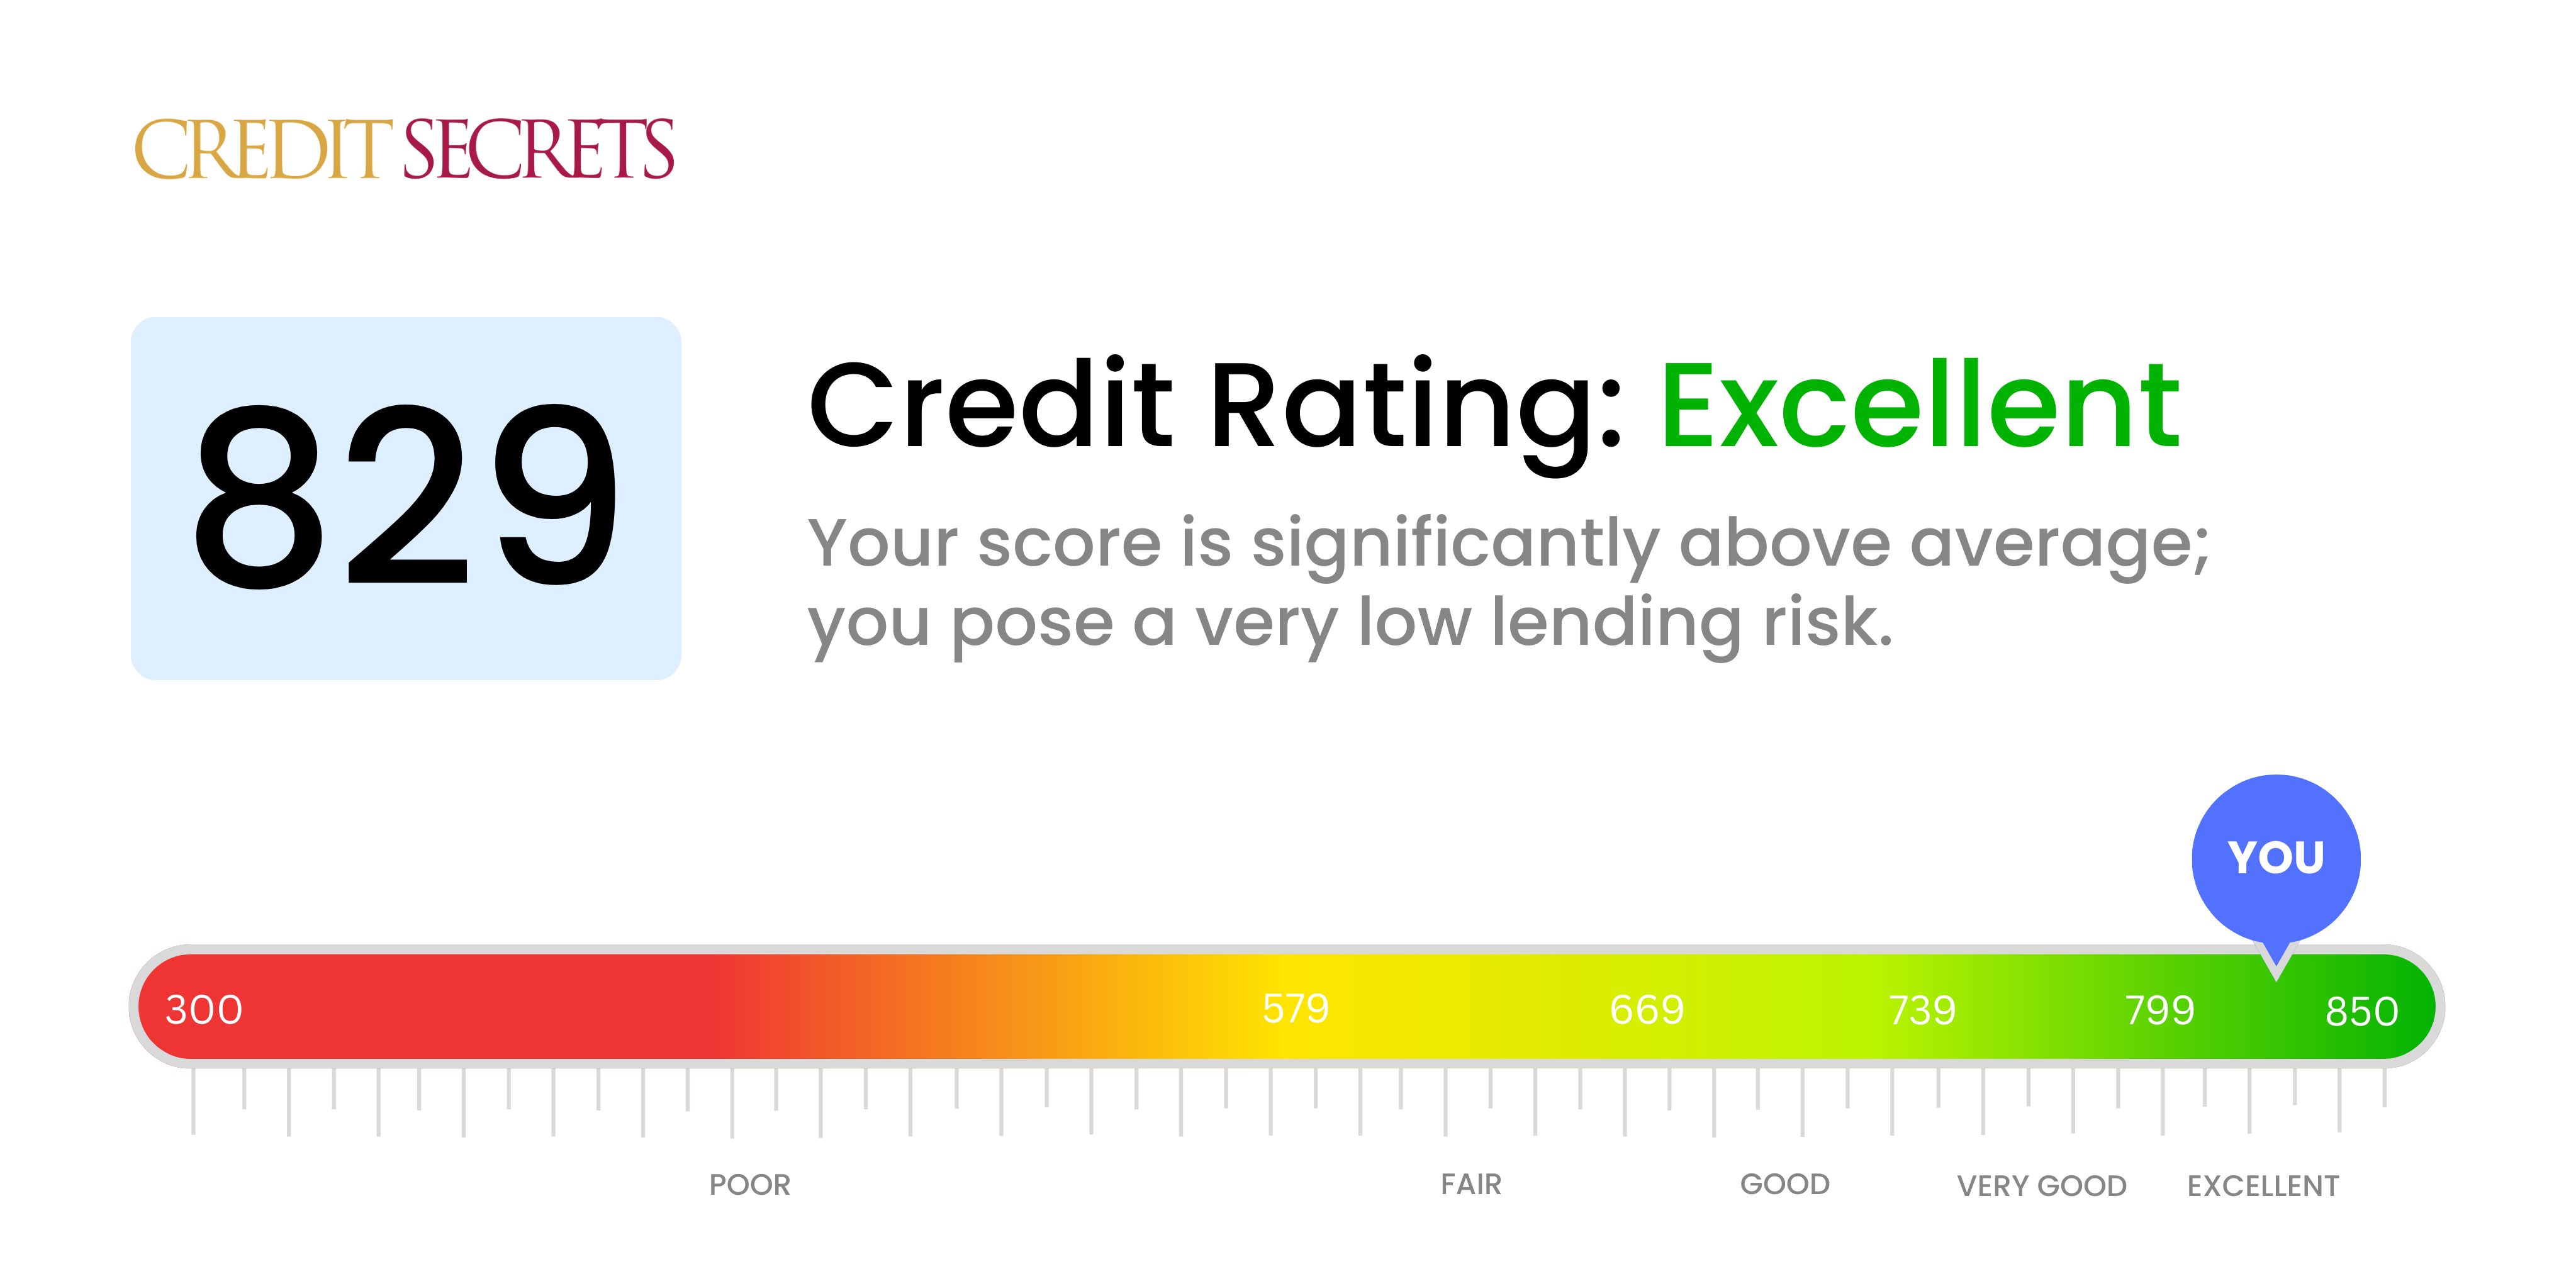 Is 829 a good credit score?